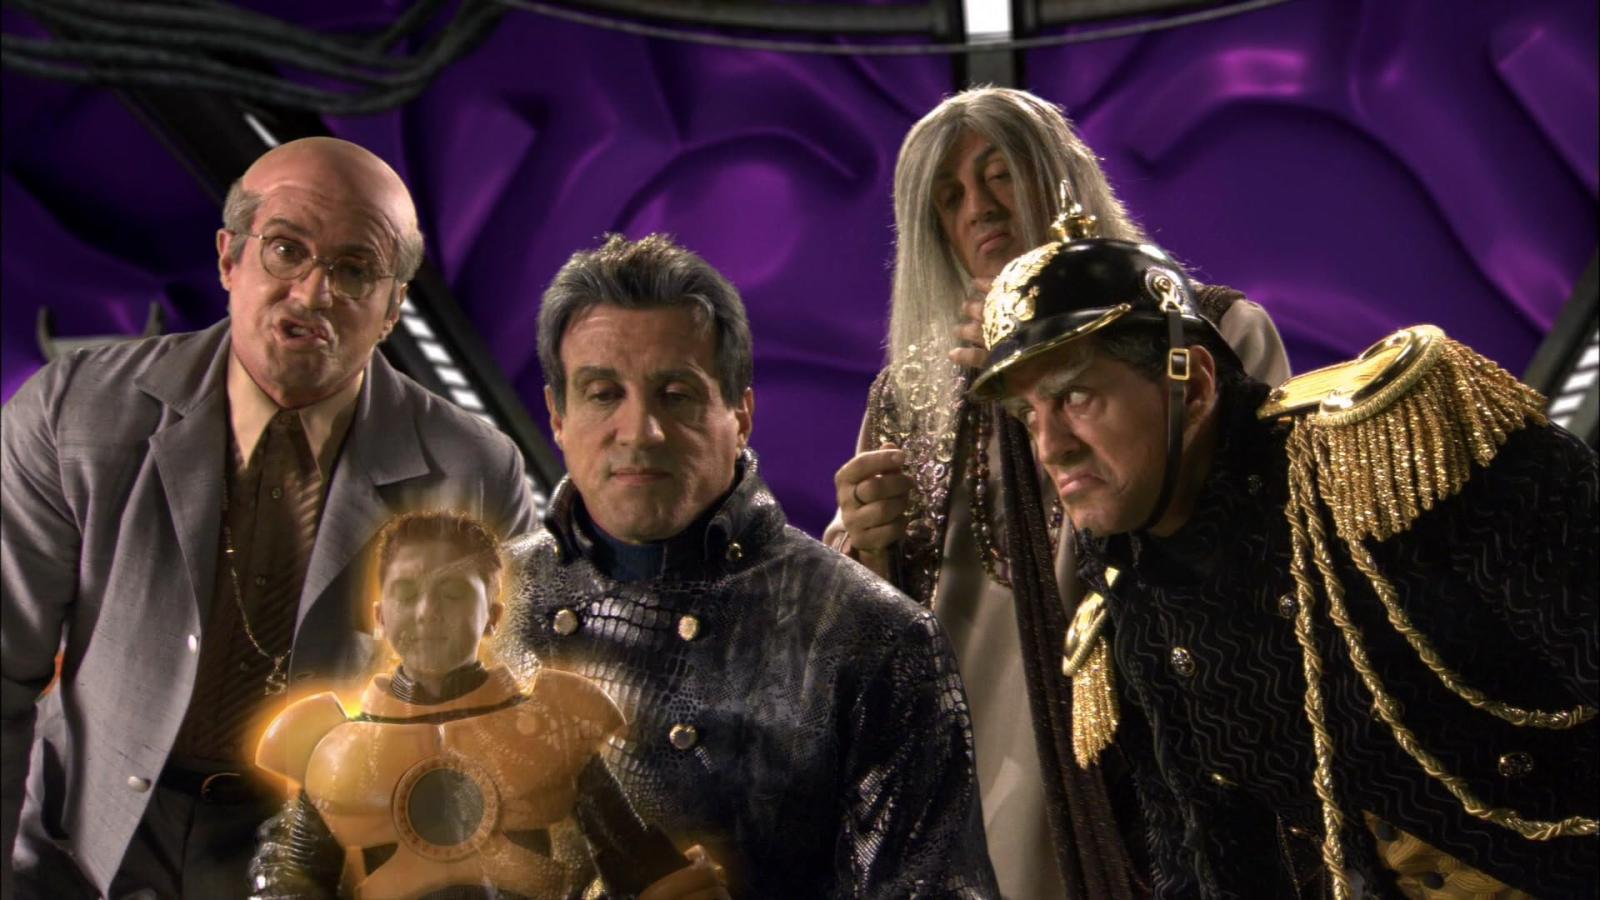 All 5 Spy Kids Movies, Ranked from Insult to Classic To Real Cinema - image 2